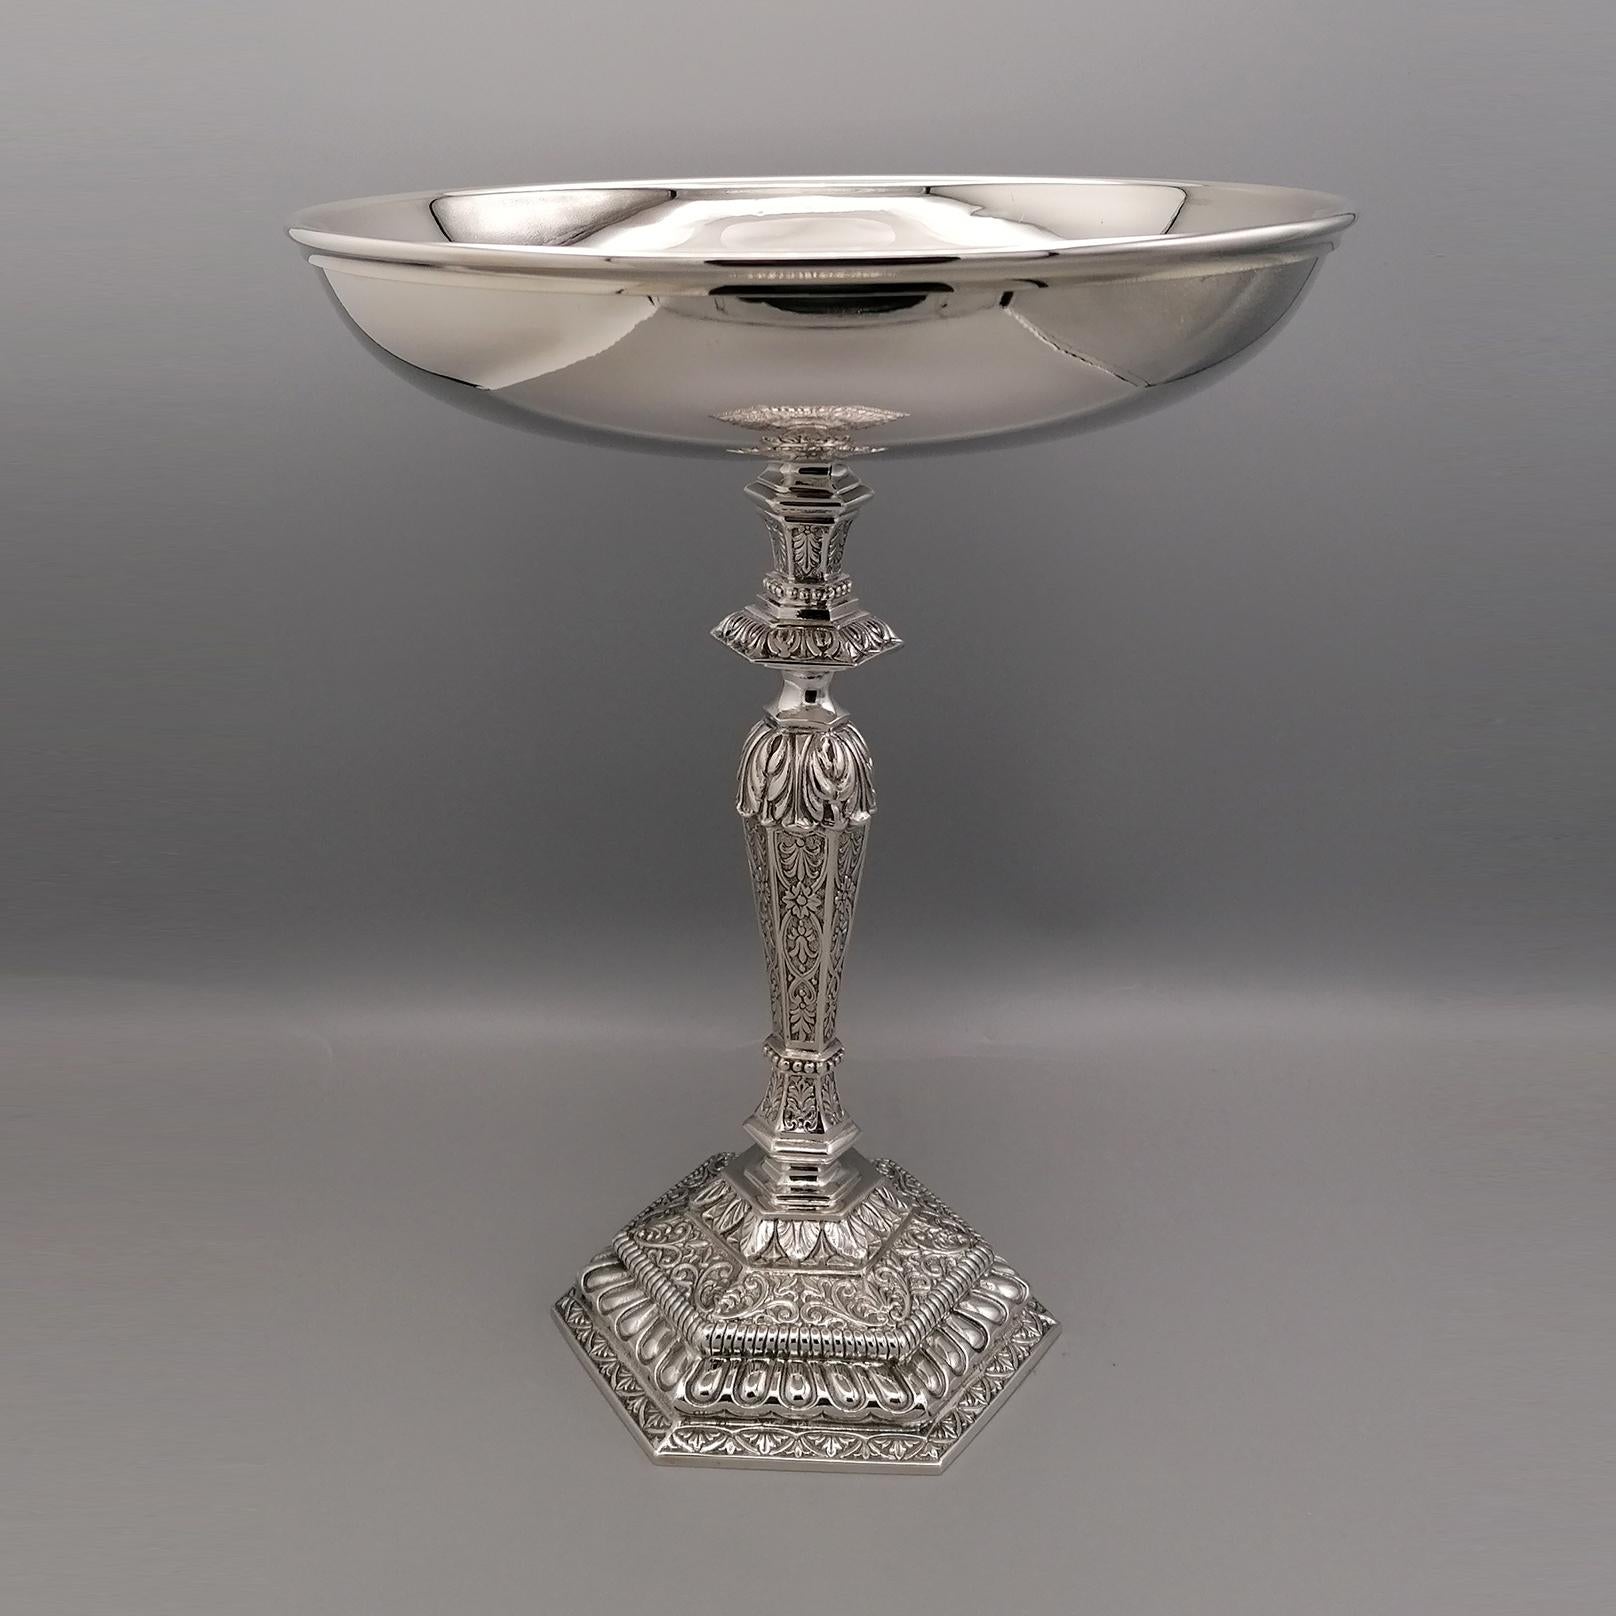 Solid silver comport in Empire style.
The hexagonal base and the stem have been made in cast and finely chiseled,
while the top cup is round and completely smooth.
Measure: 1,220 grams.
 